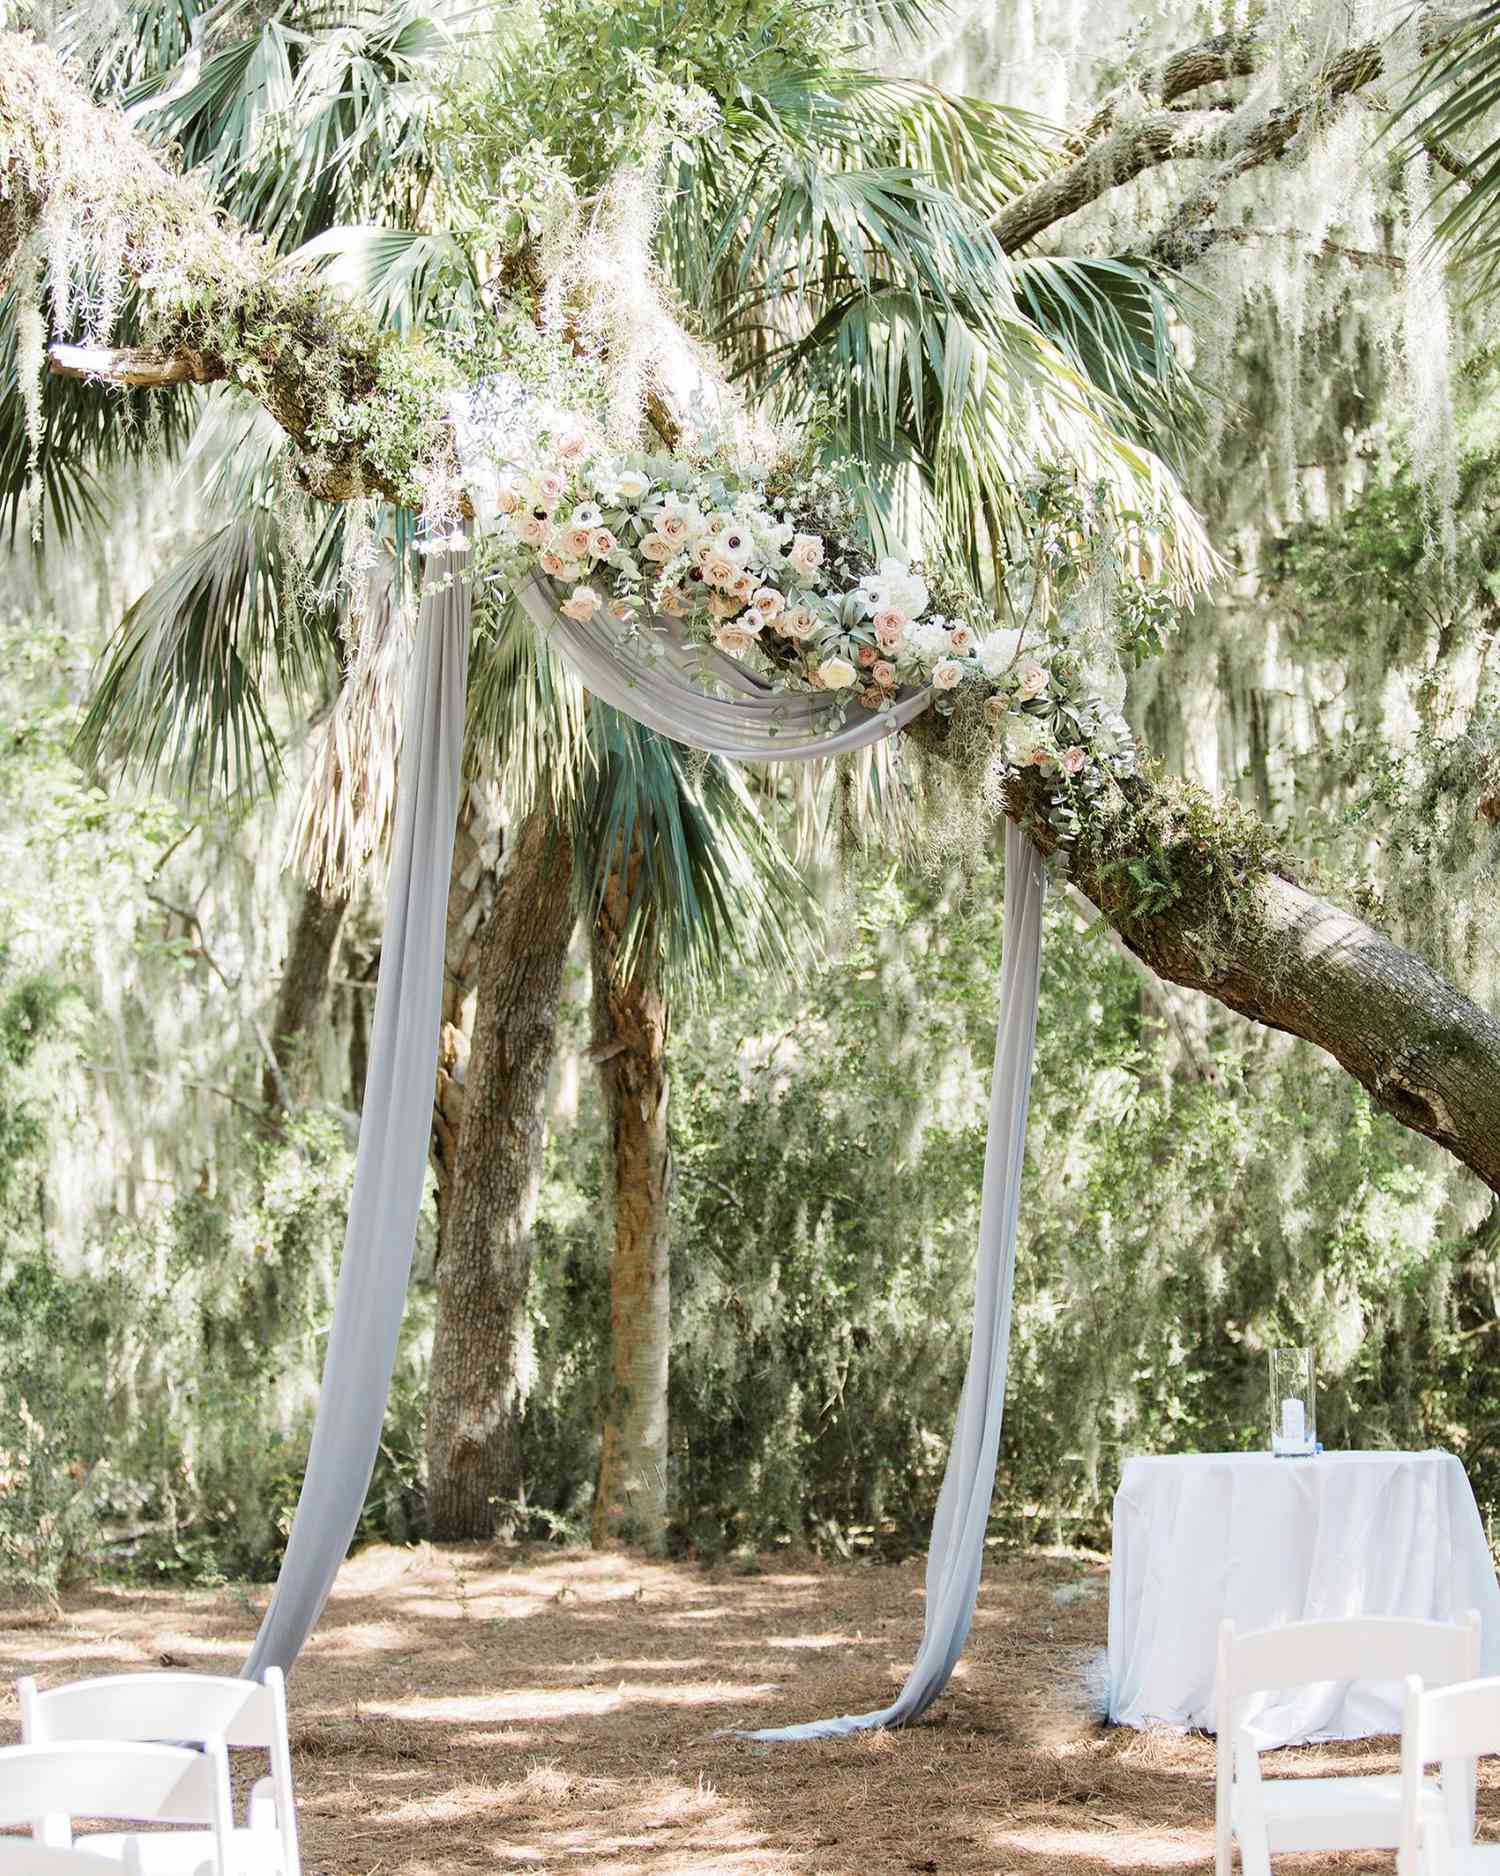 muted blue tulle hanging from tree